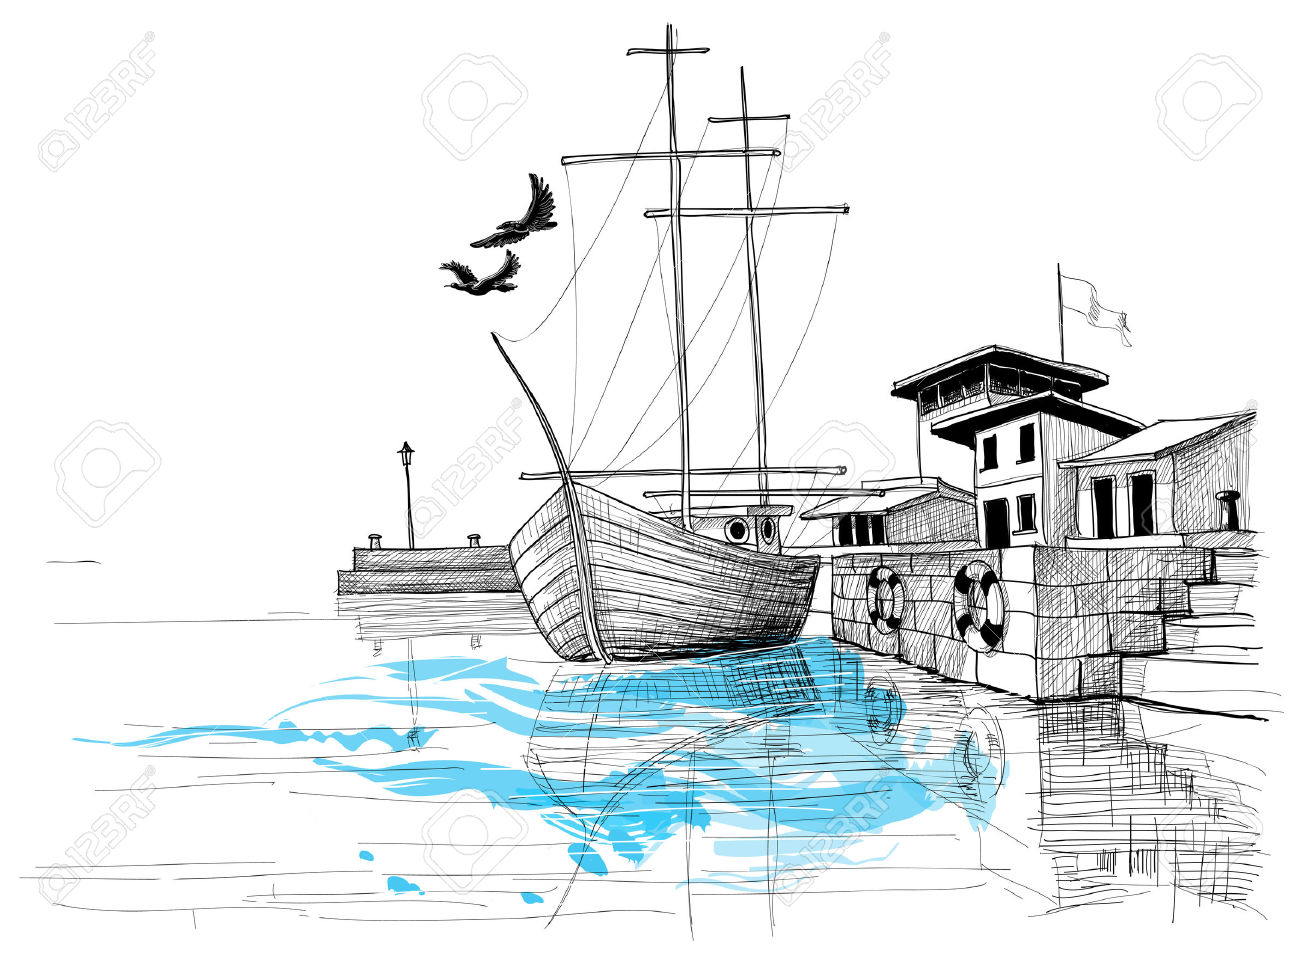 Harbor Sketch, Boat On Shore Illustration Royalty Free Cliparts.